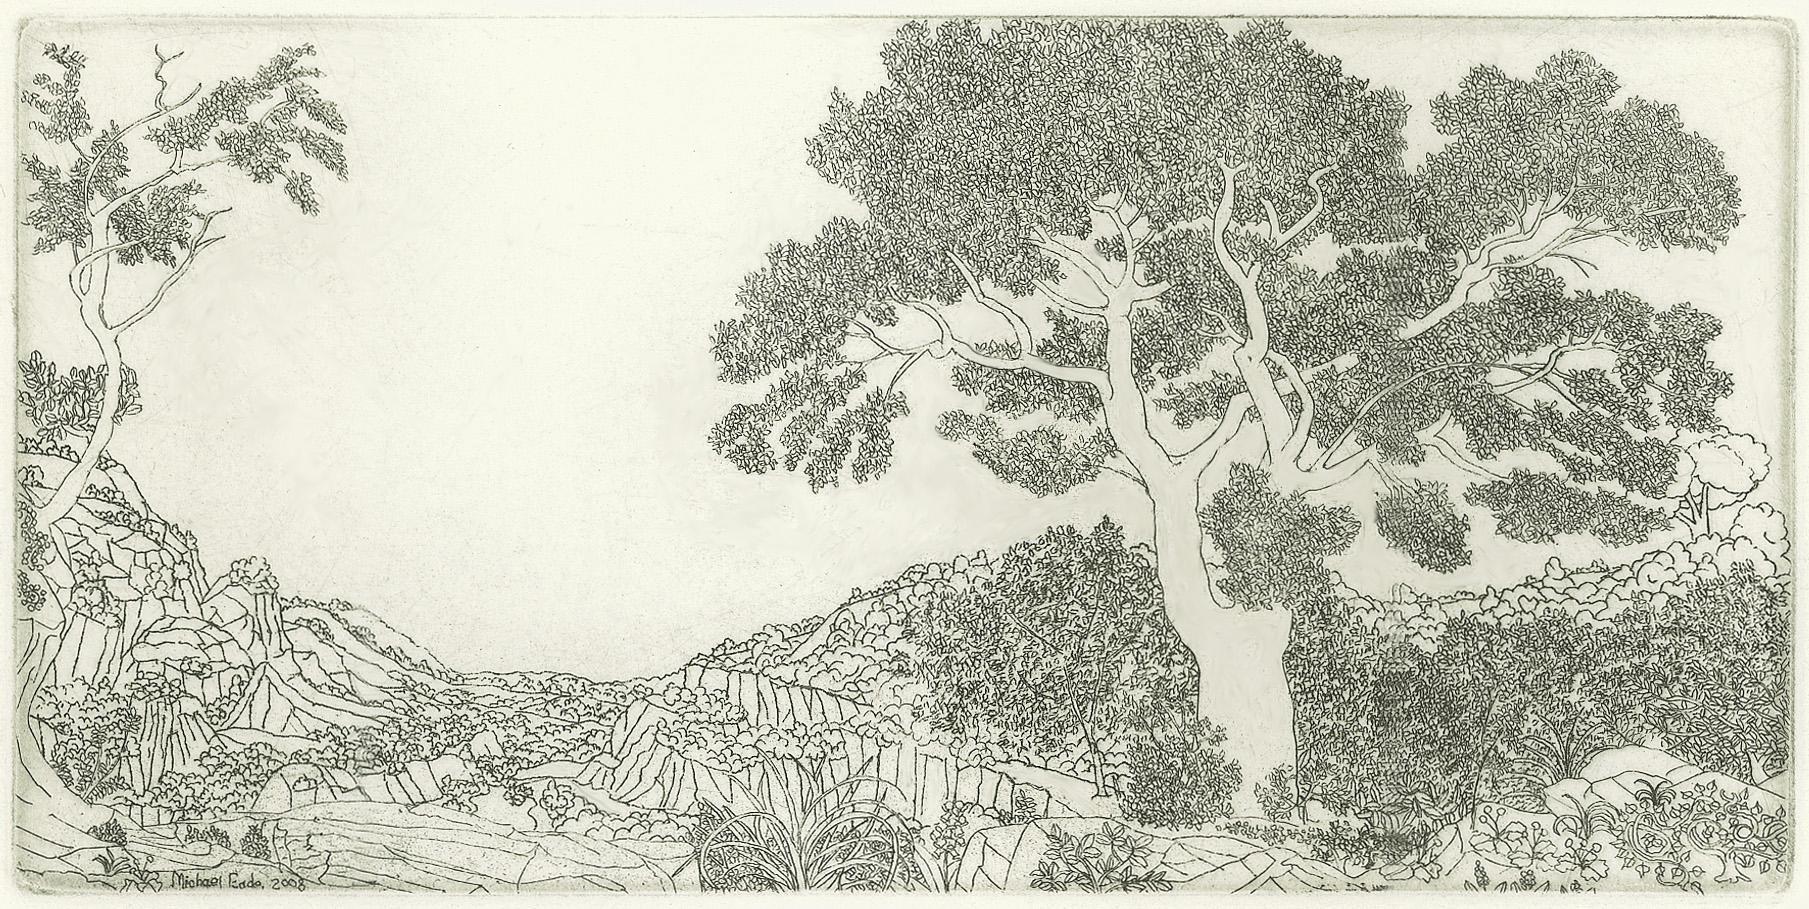 Michael Eade Landscape Print - Landscape No. 2, intricate etching of a forest on paper